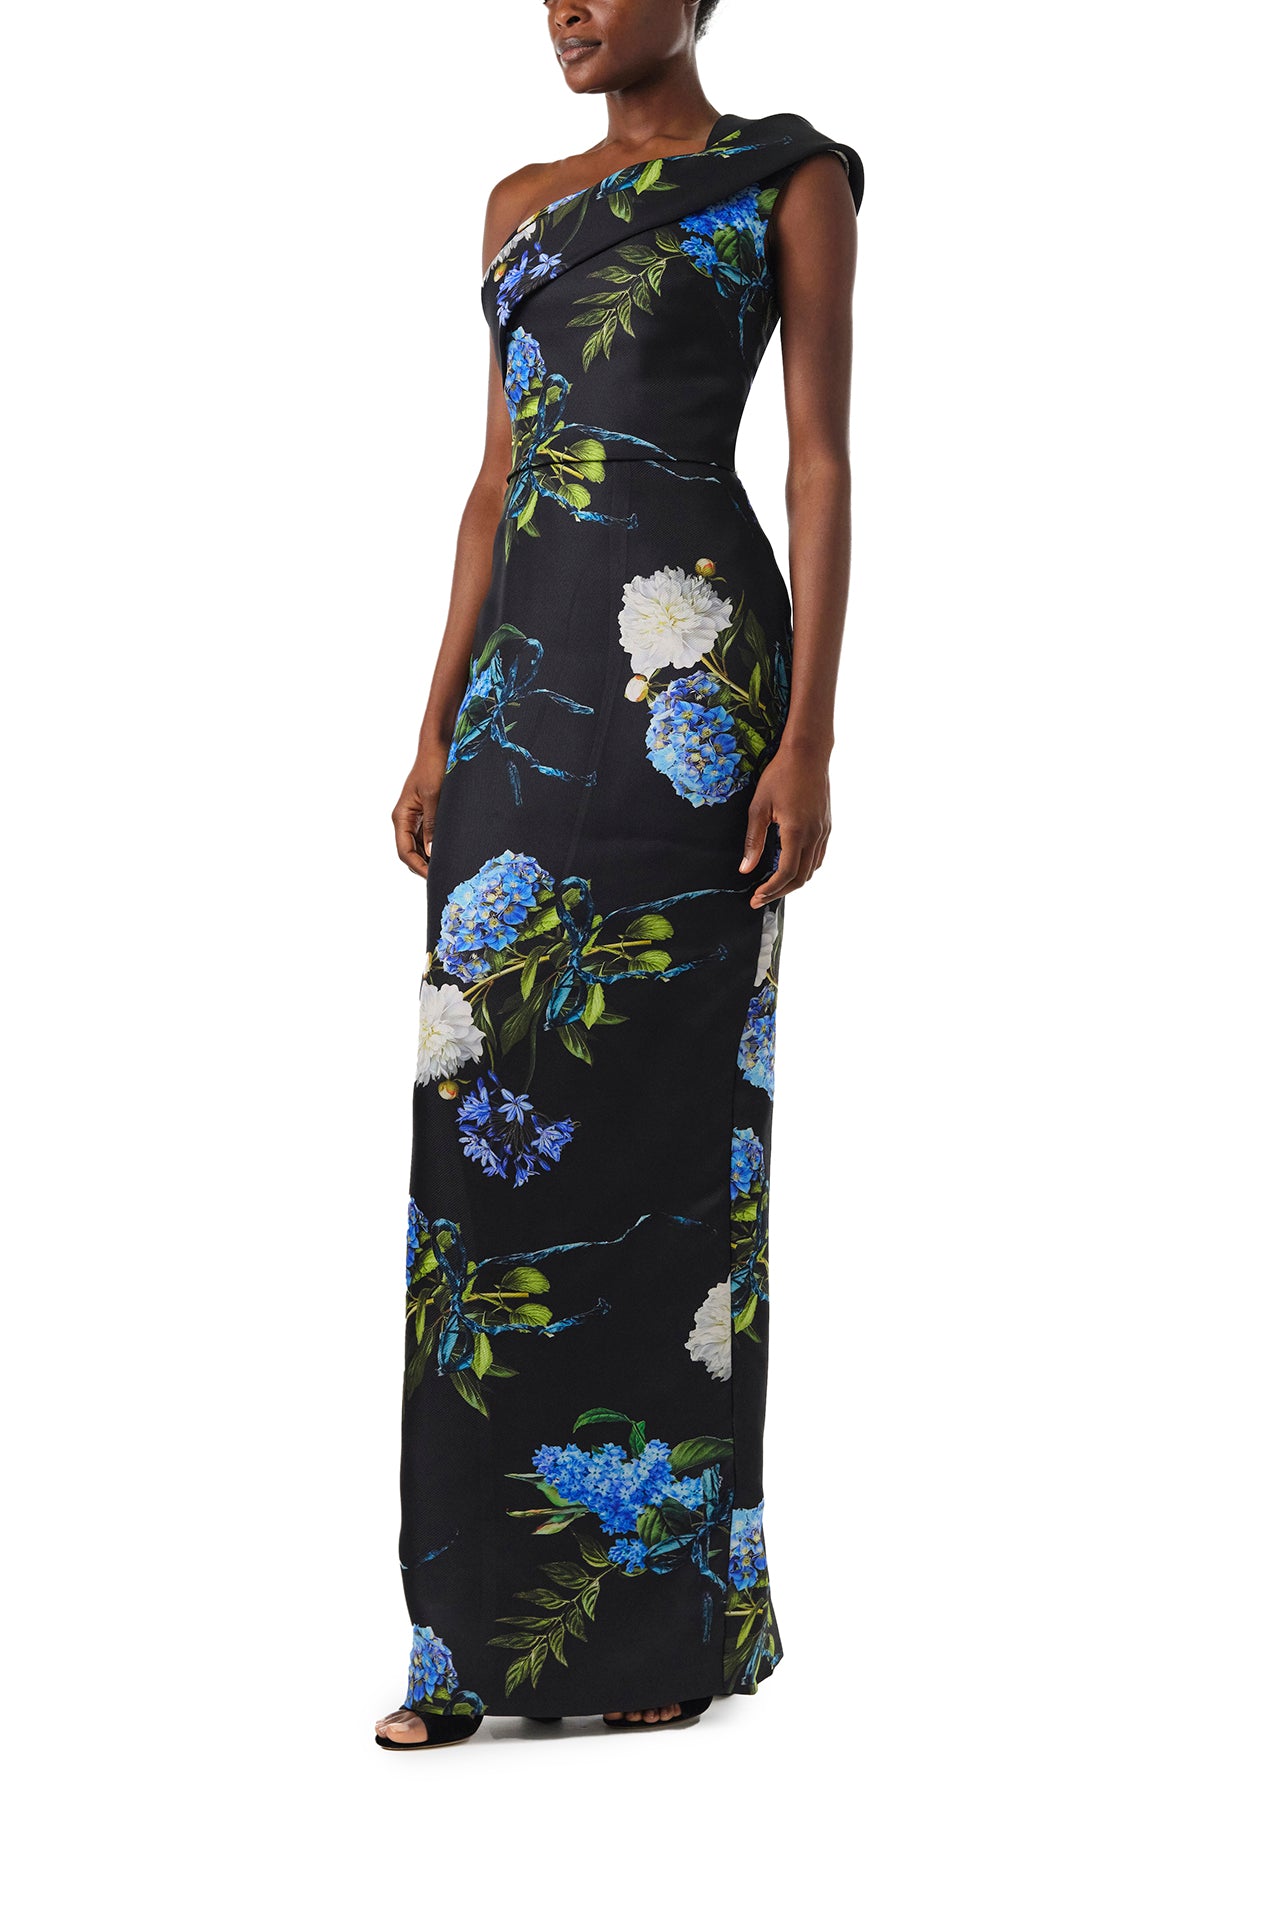 Monique Lhuillier Fall 2024 night sky floral, one shoulder column gown with draped neckline and natural waist seam - left side.